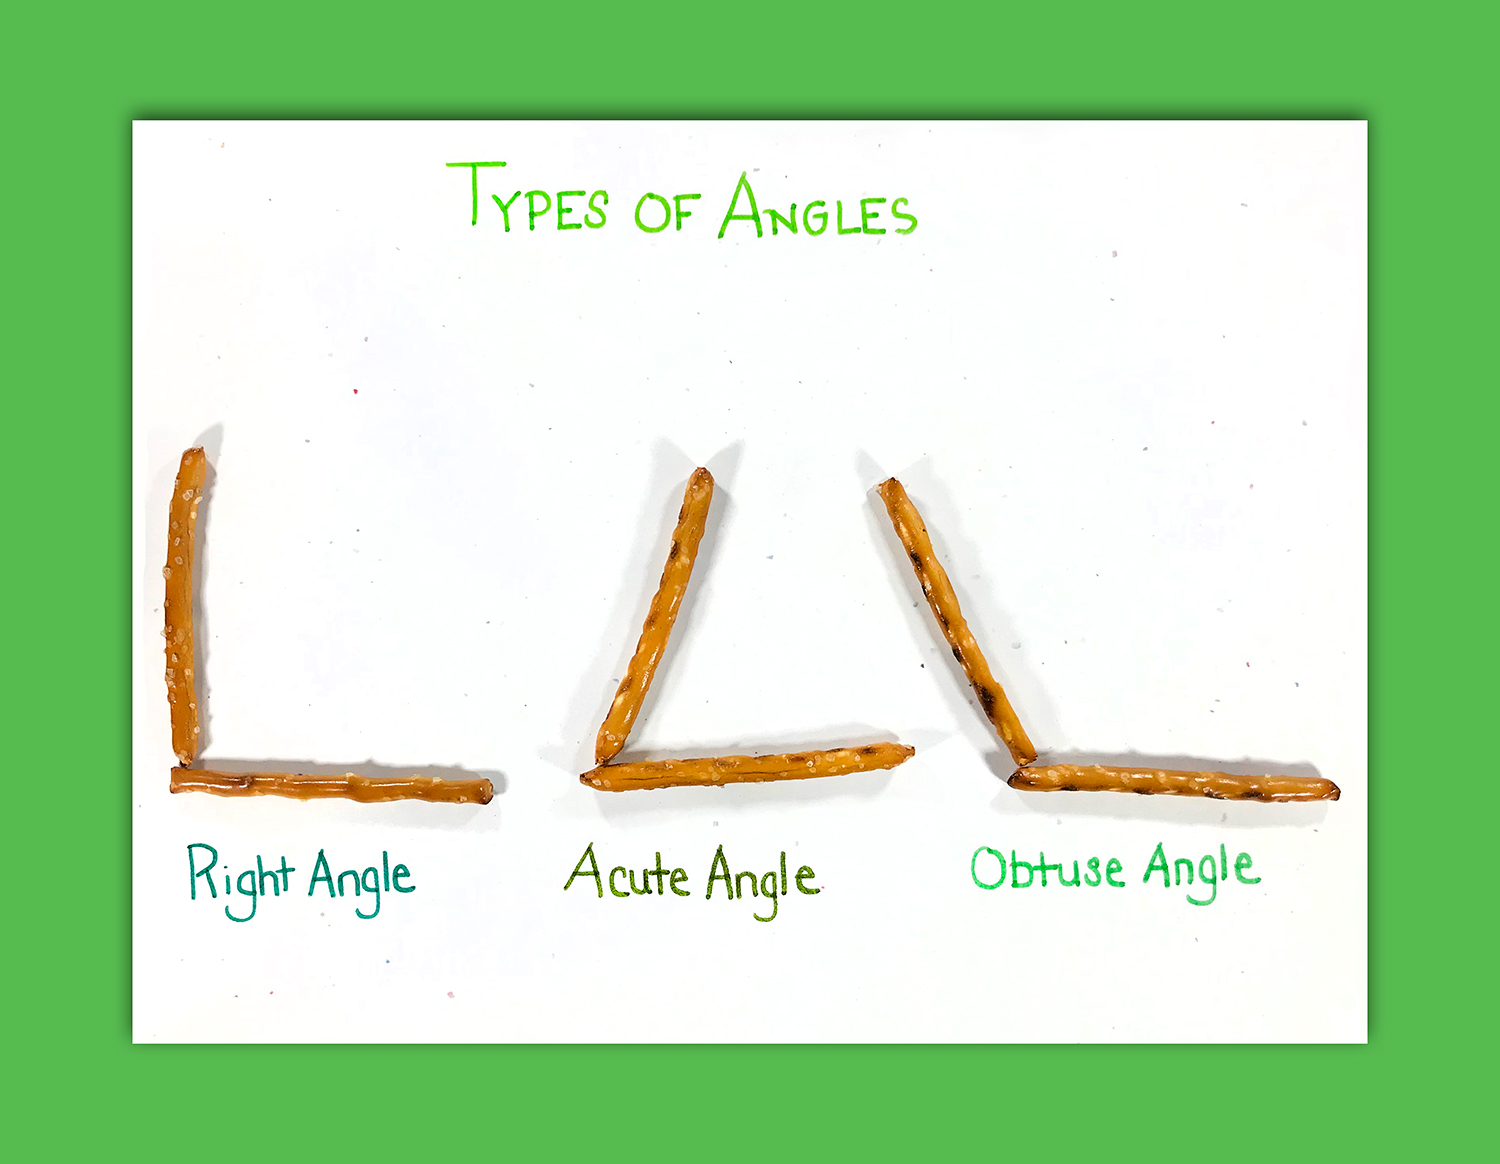 Making Angles With Pretzels